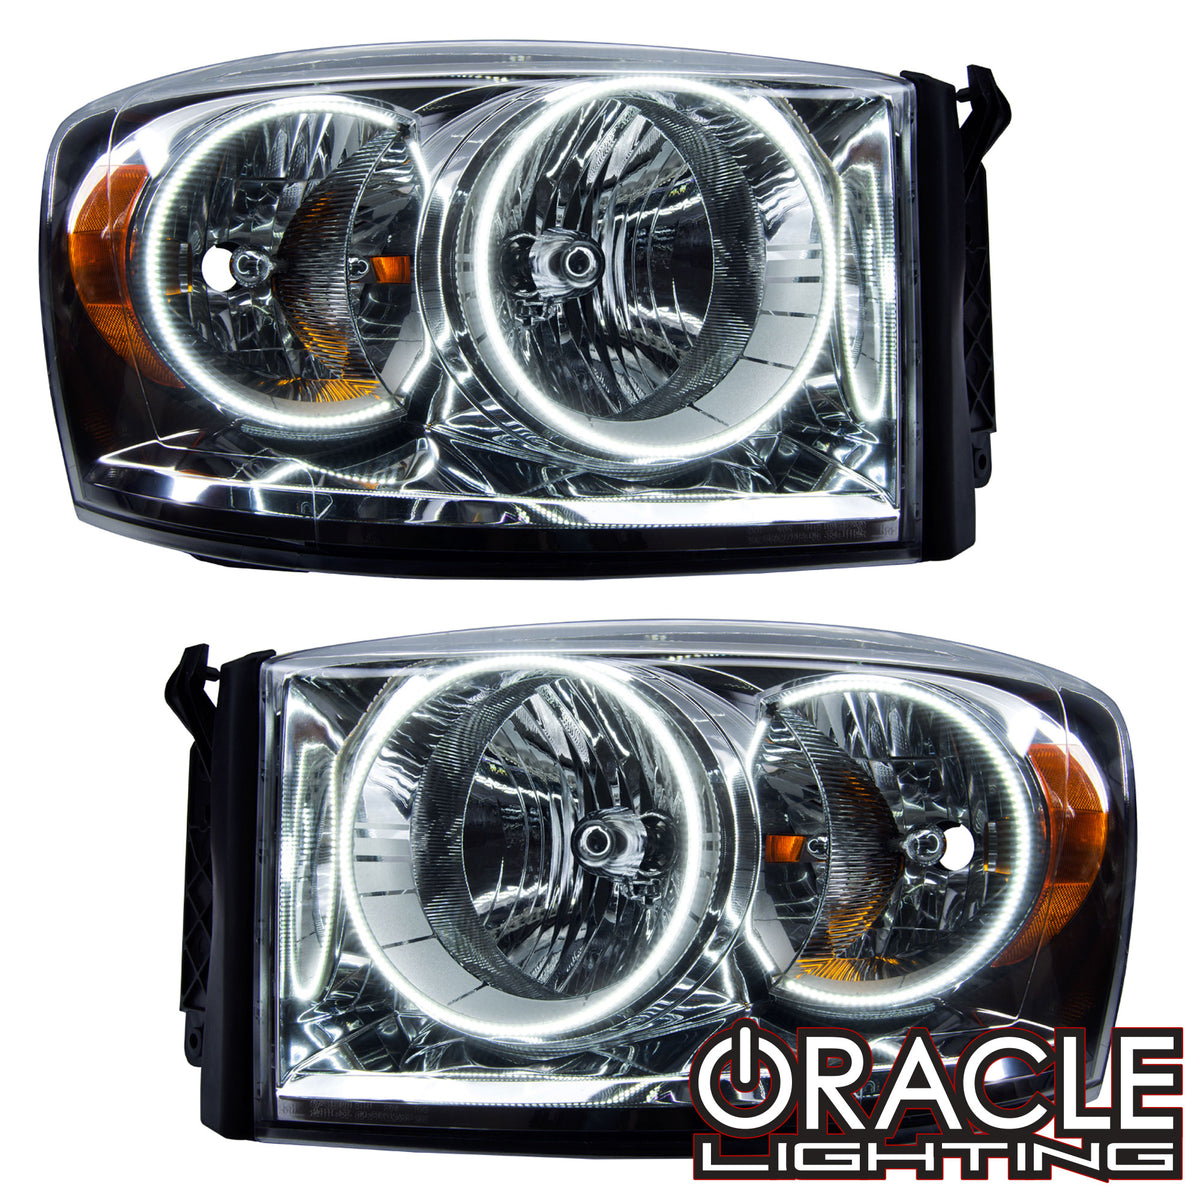 2007-2008 Dodge Ram Pre-Assembled Halo Headlights | ORACLE